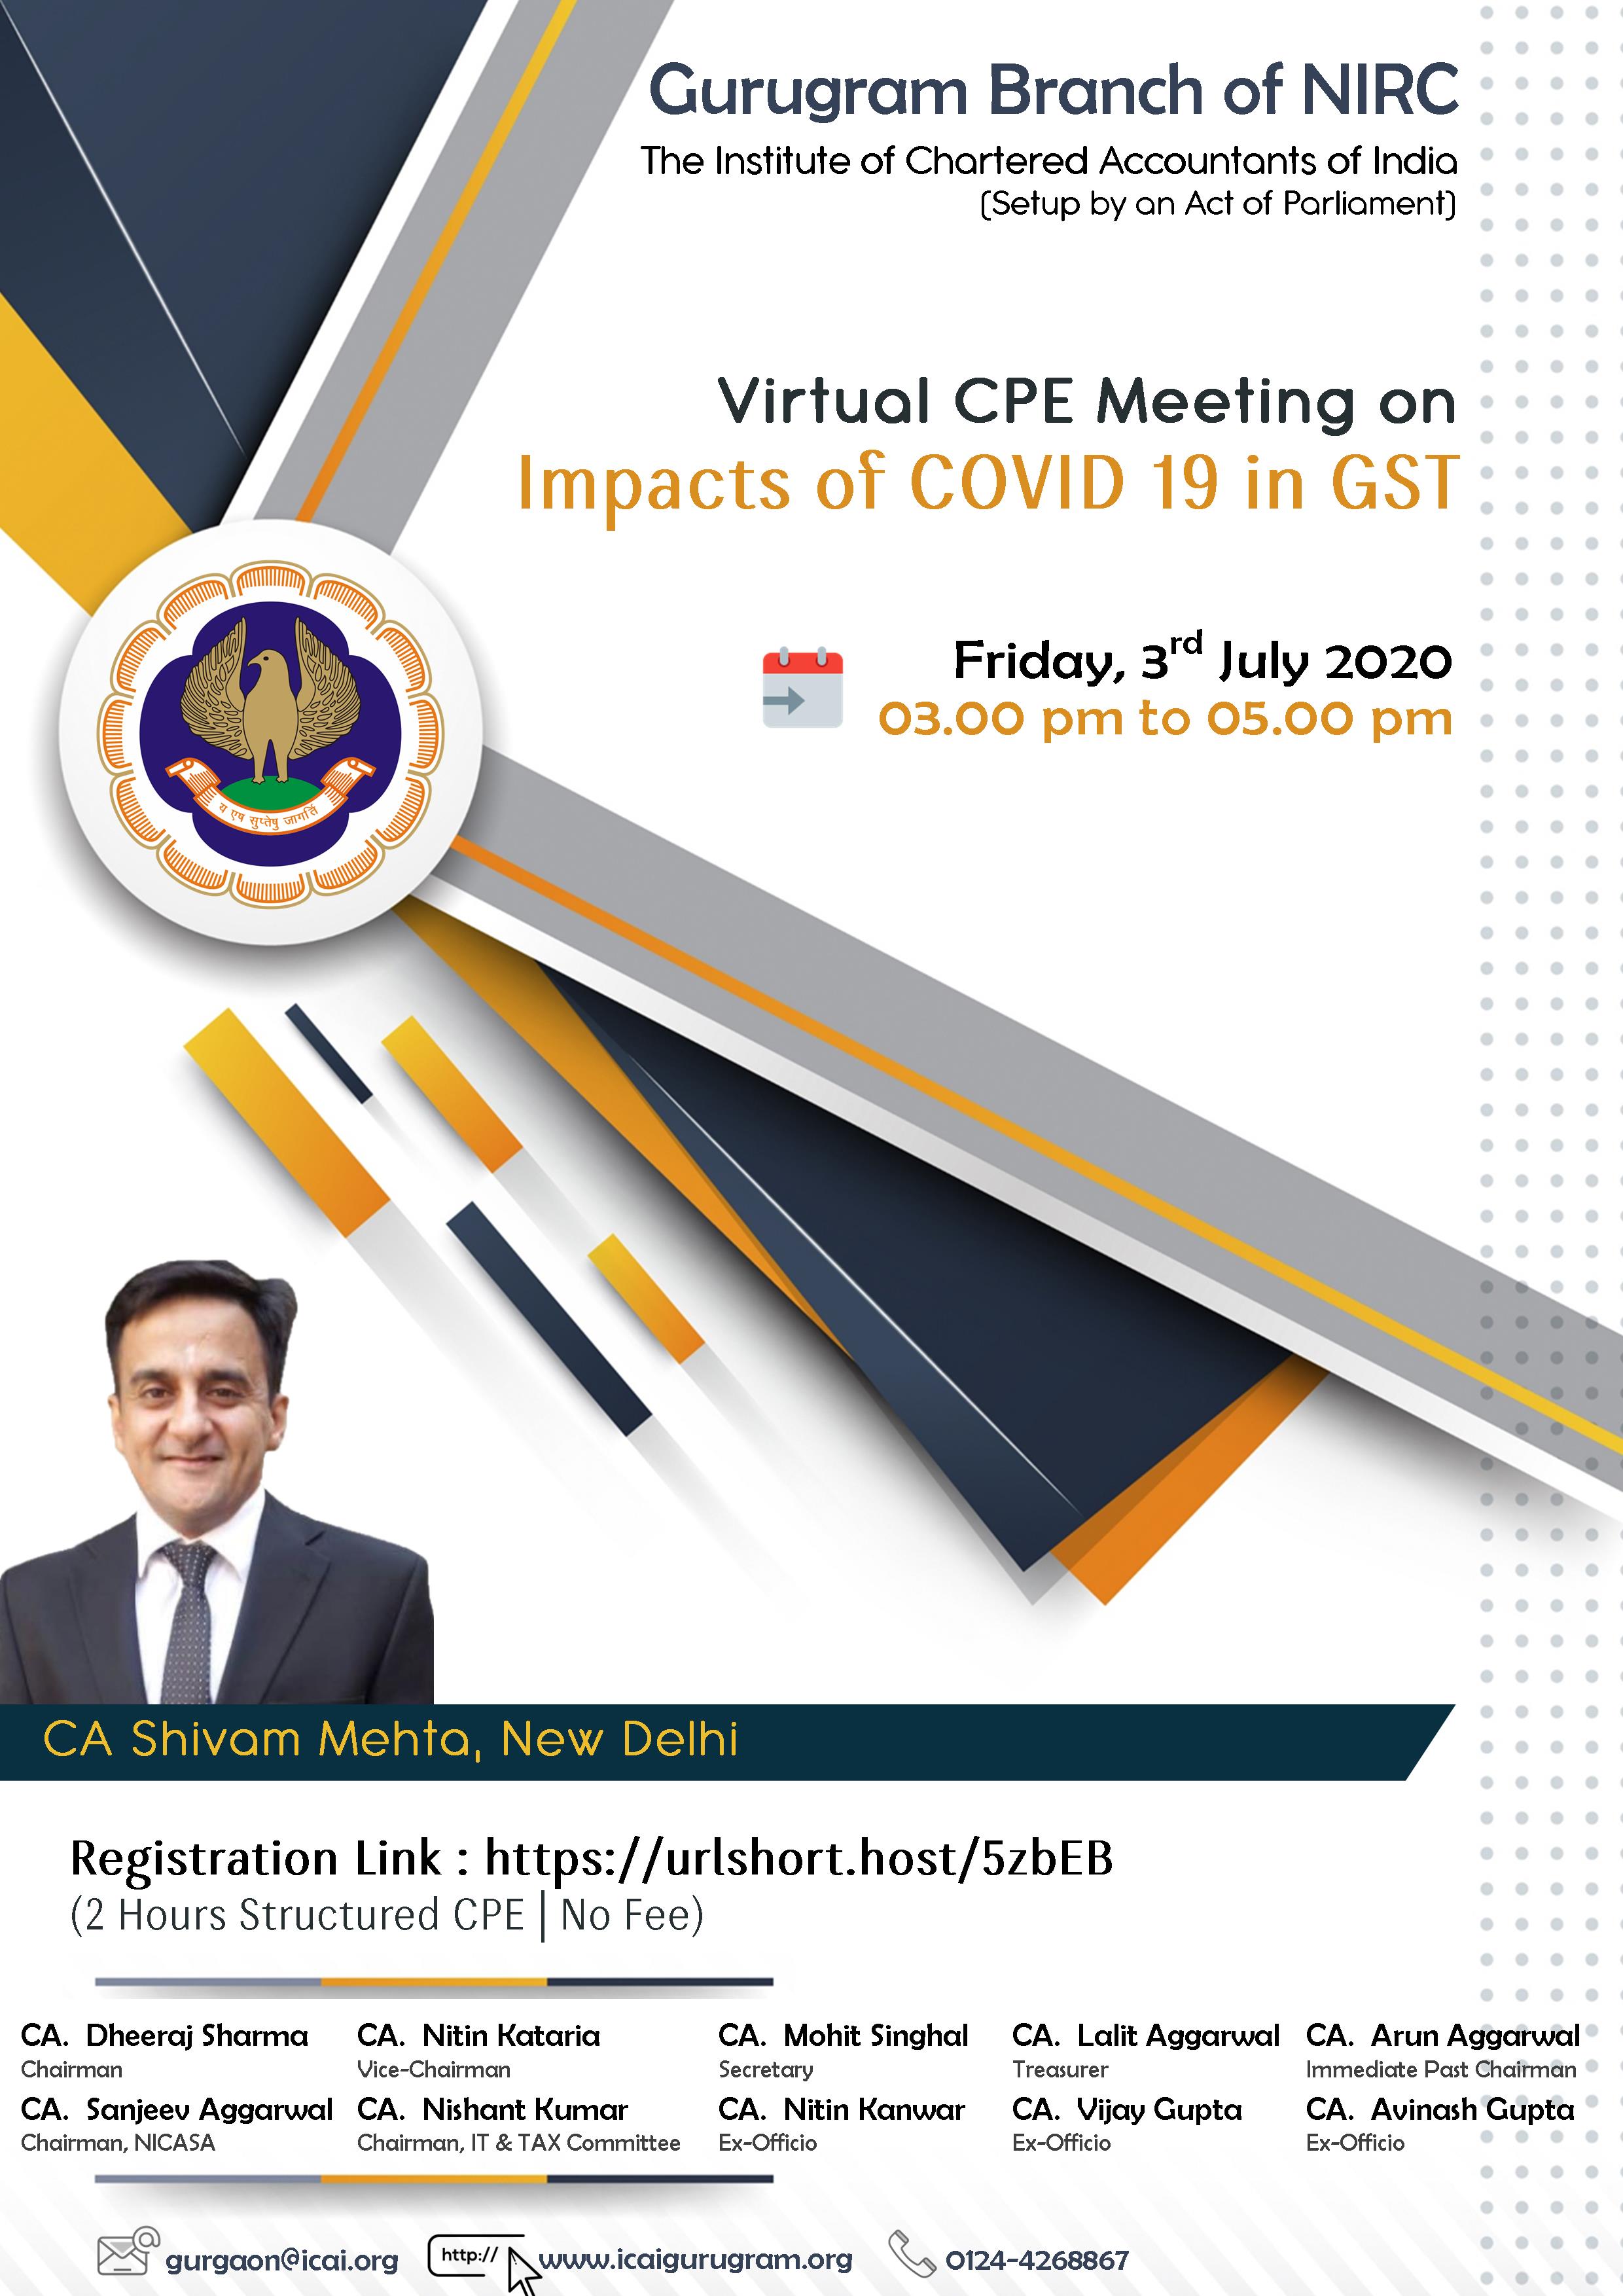 Virtual CPE Meeting on Impacts of COVID 19 in GST